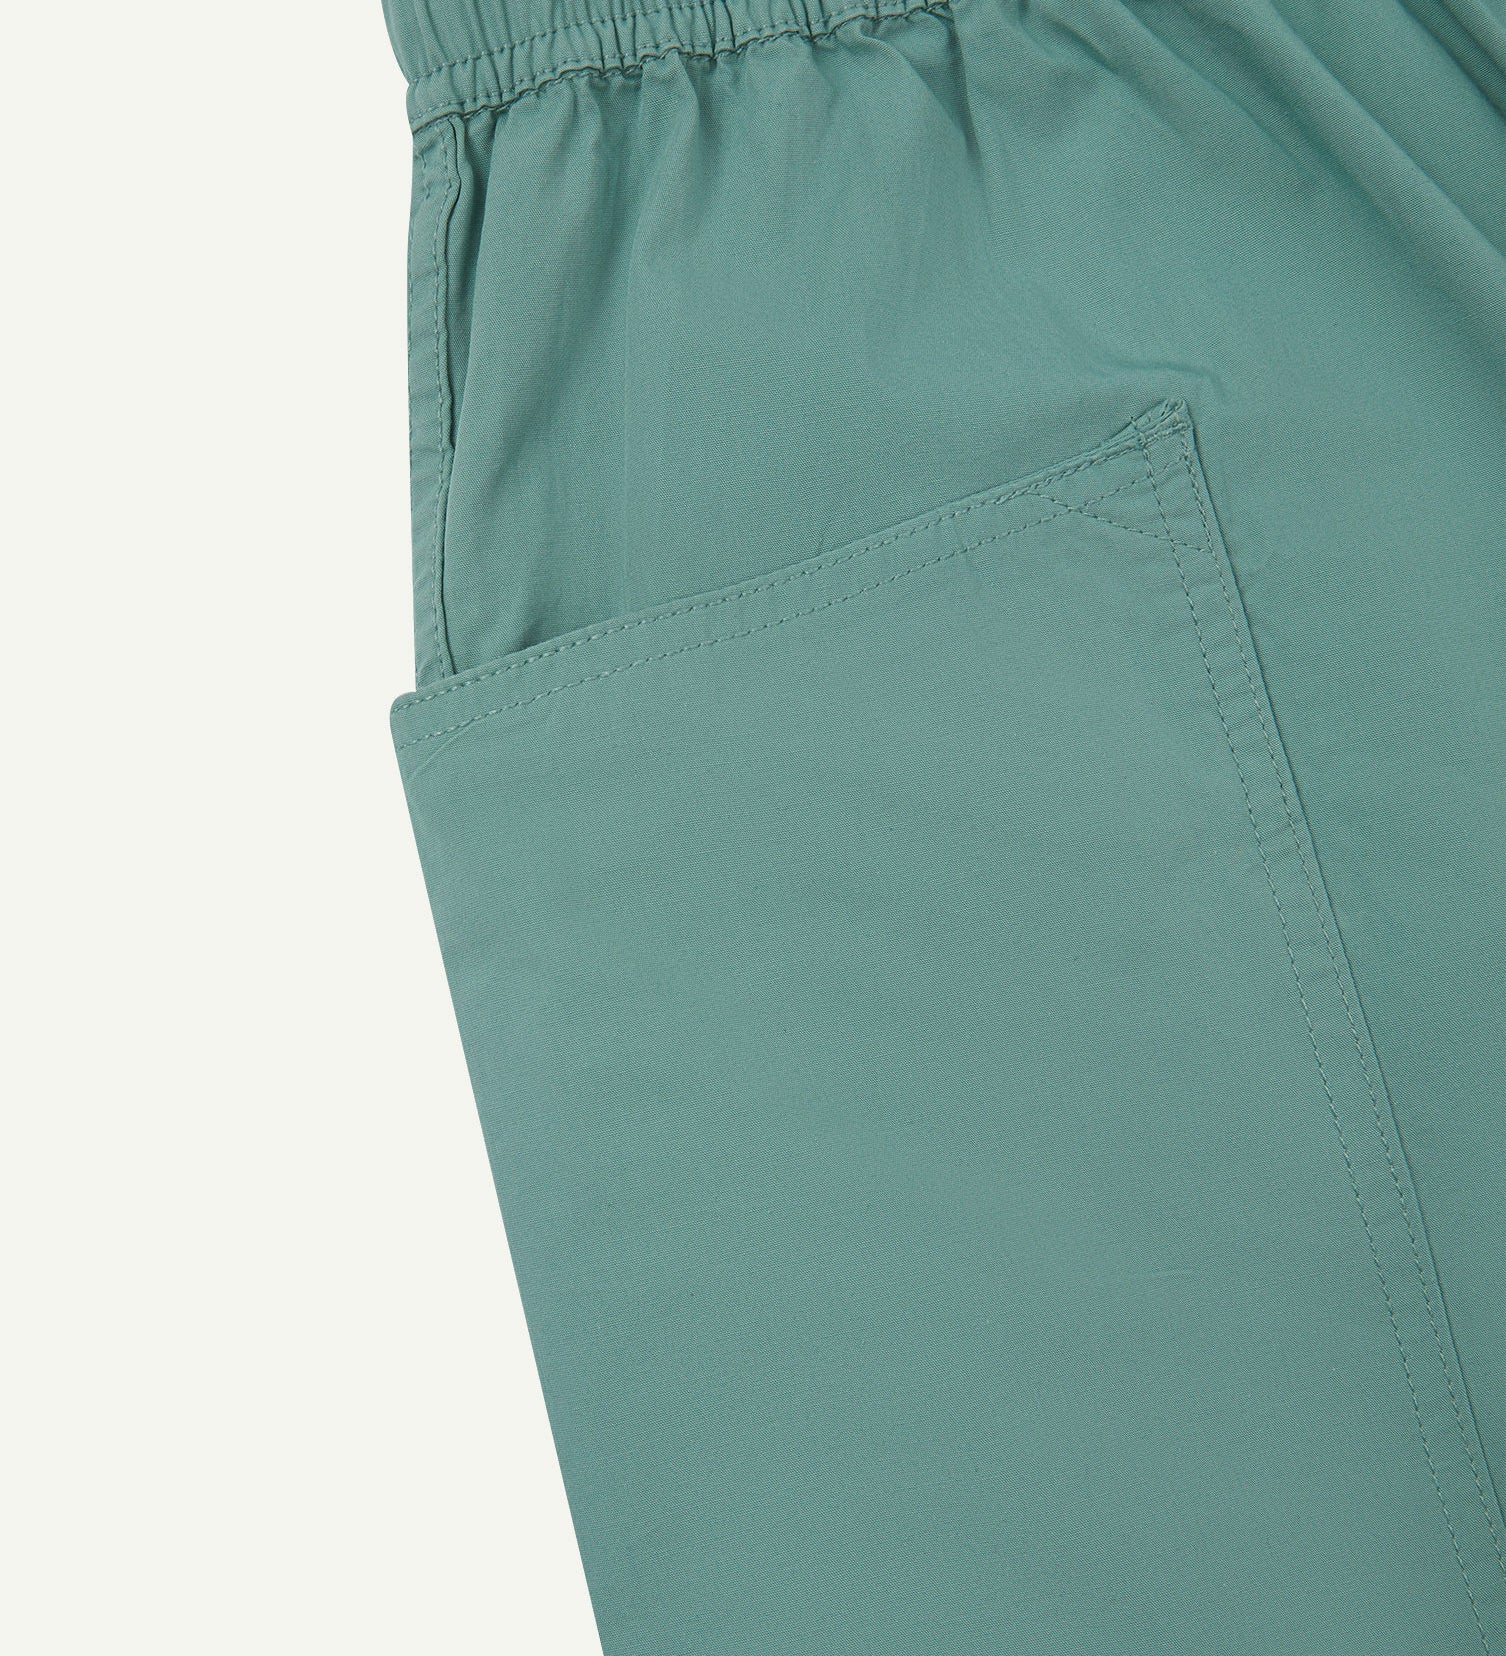 Close-up of the left pocket and stitching of the lightweight organic eucalyptus-green-green cotton shorts.